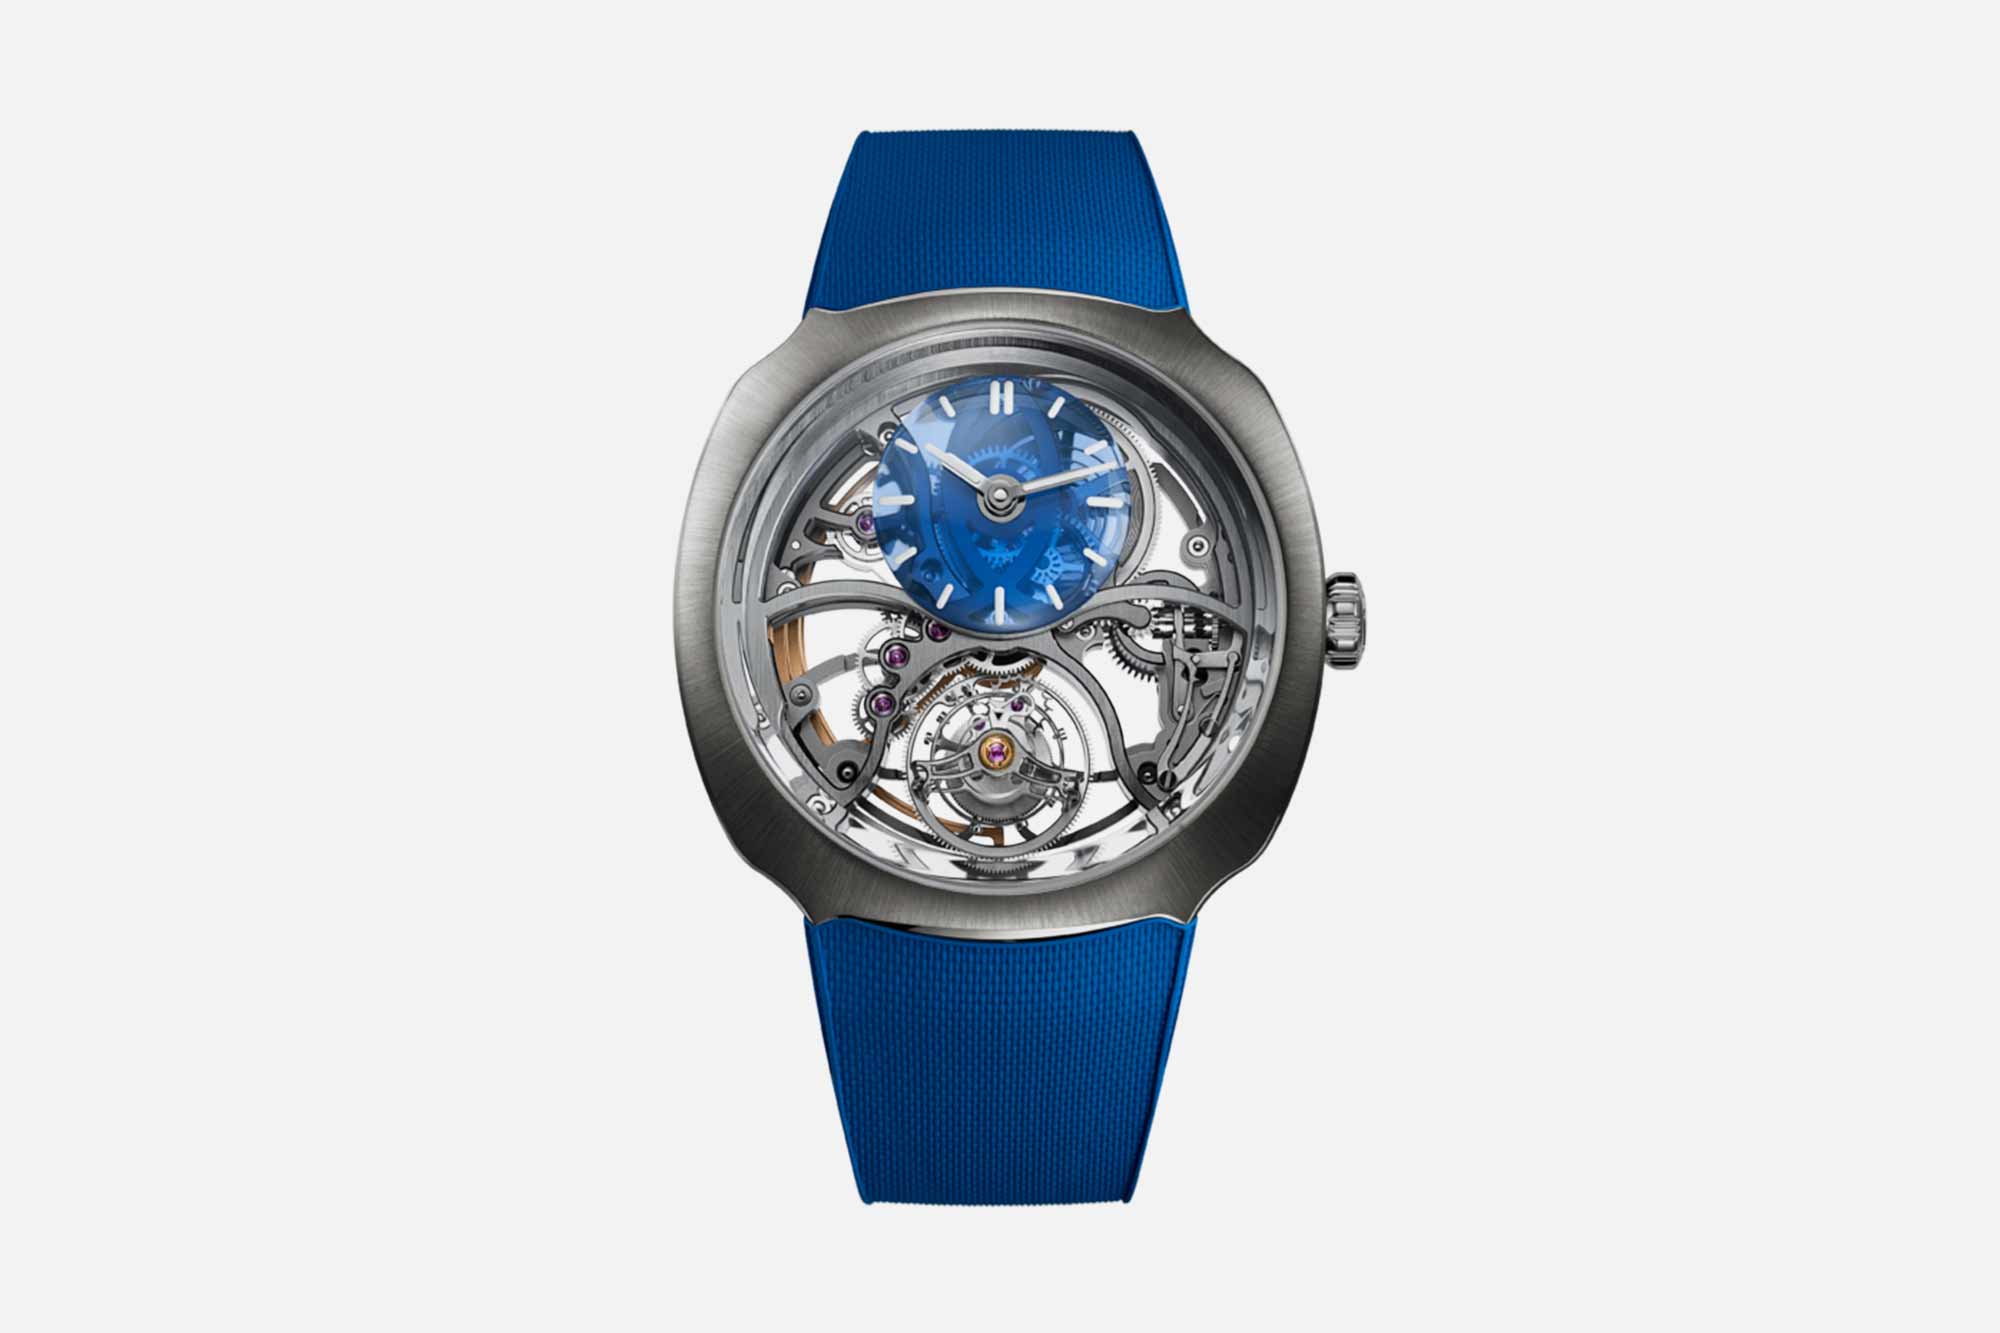 H. Moser Introduces a Pair of Streamliners on Rubber Straps with the Alpine F1 Team